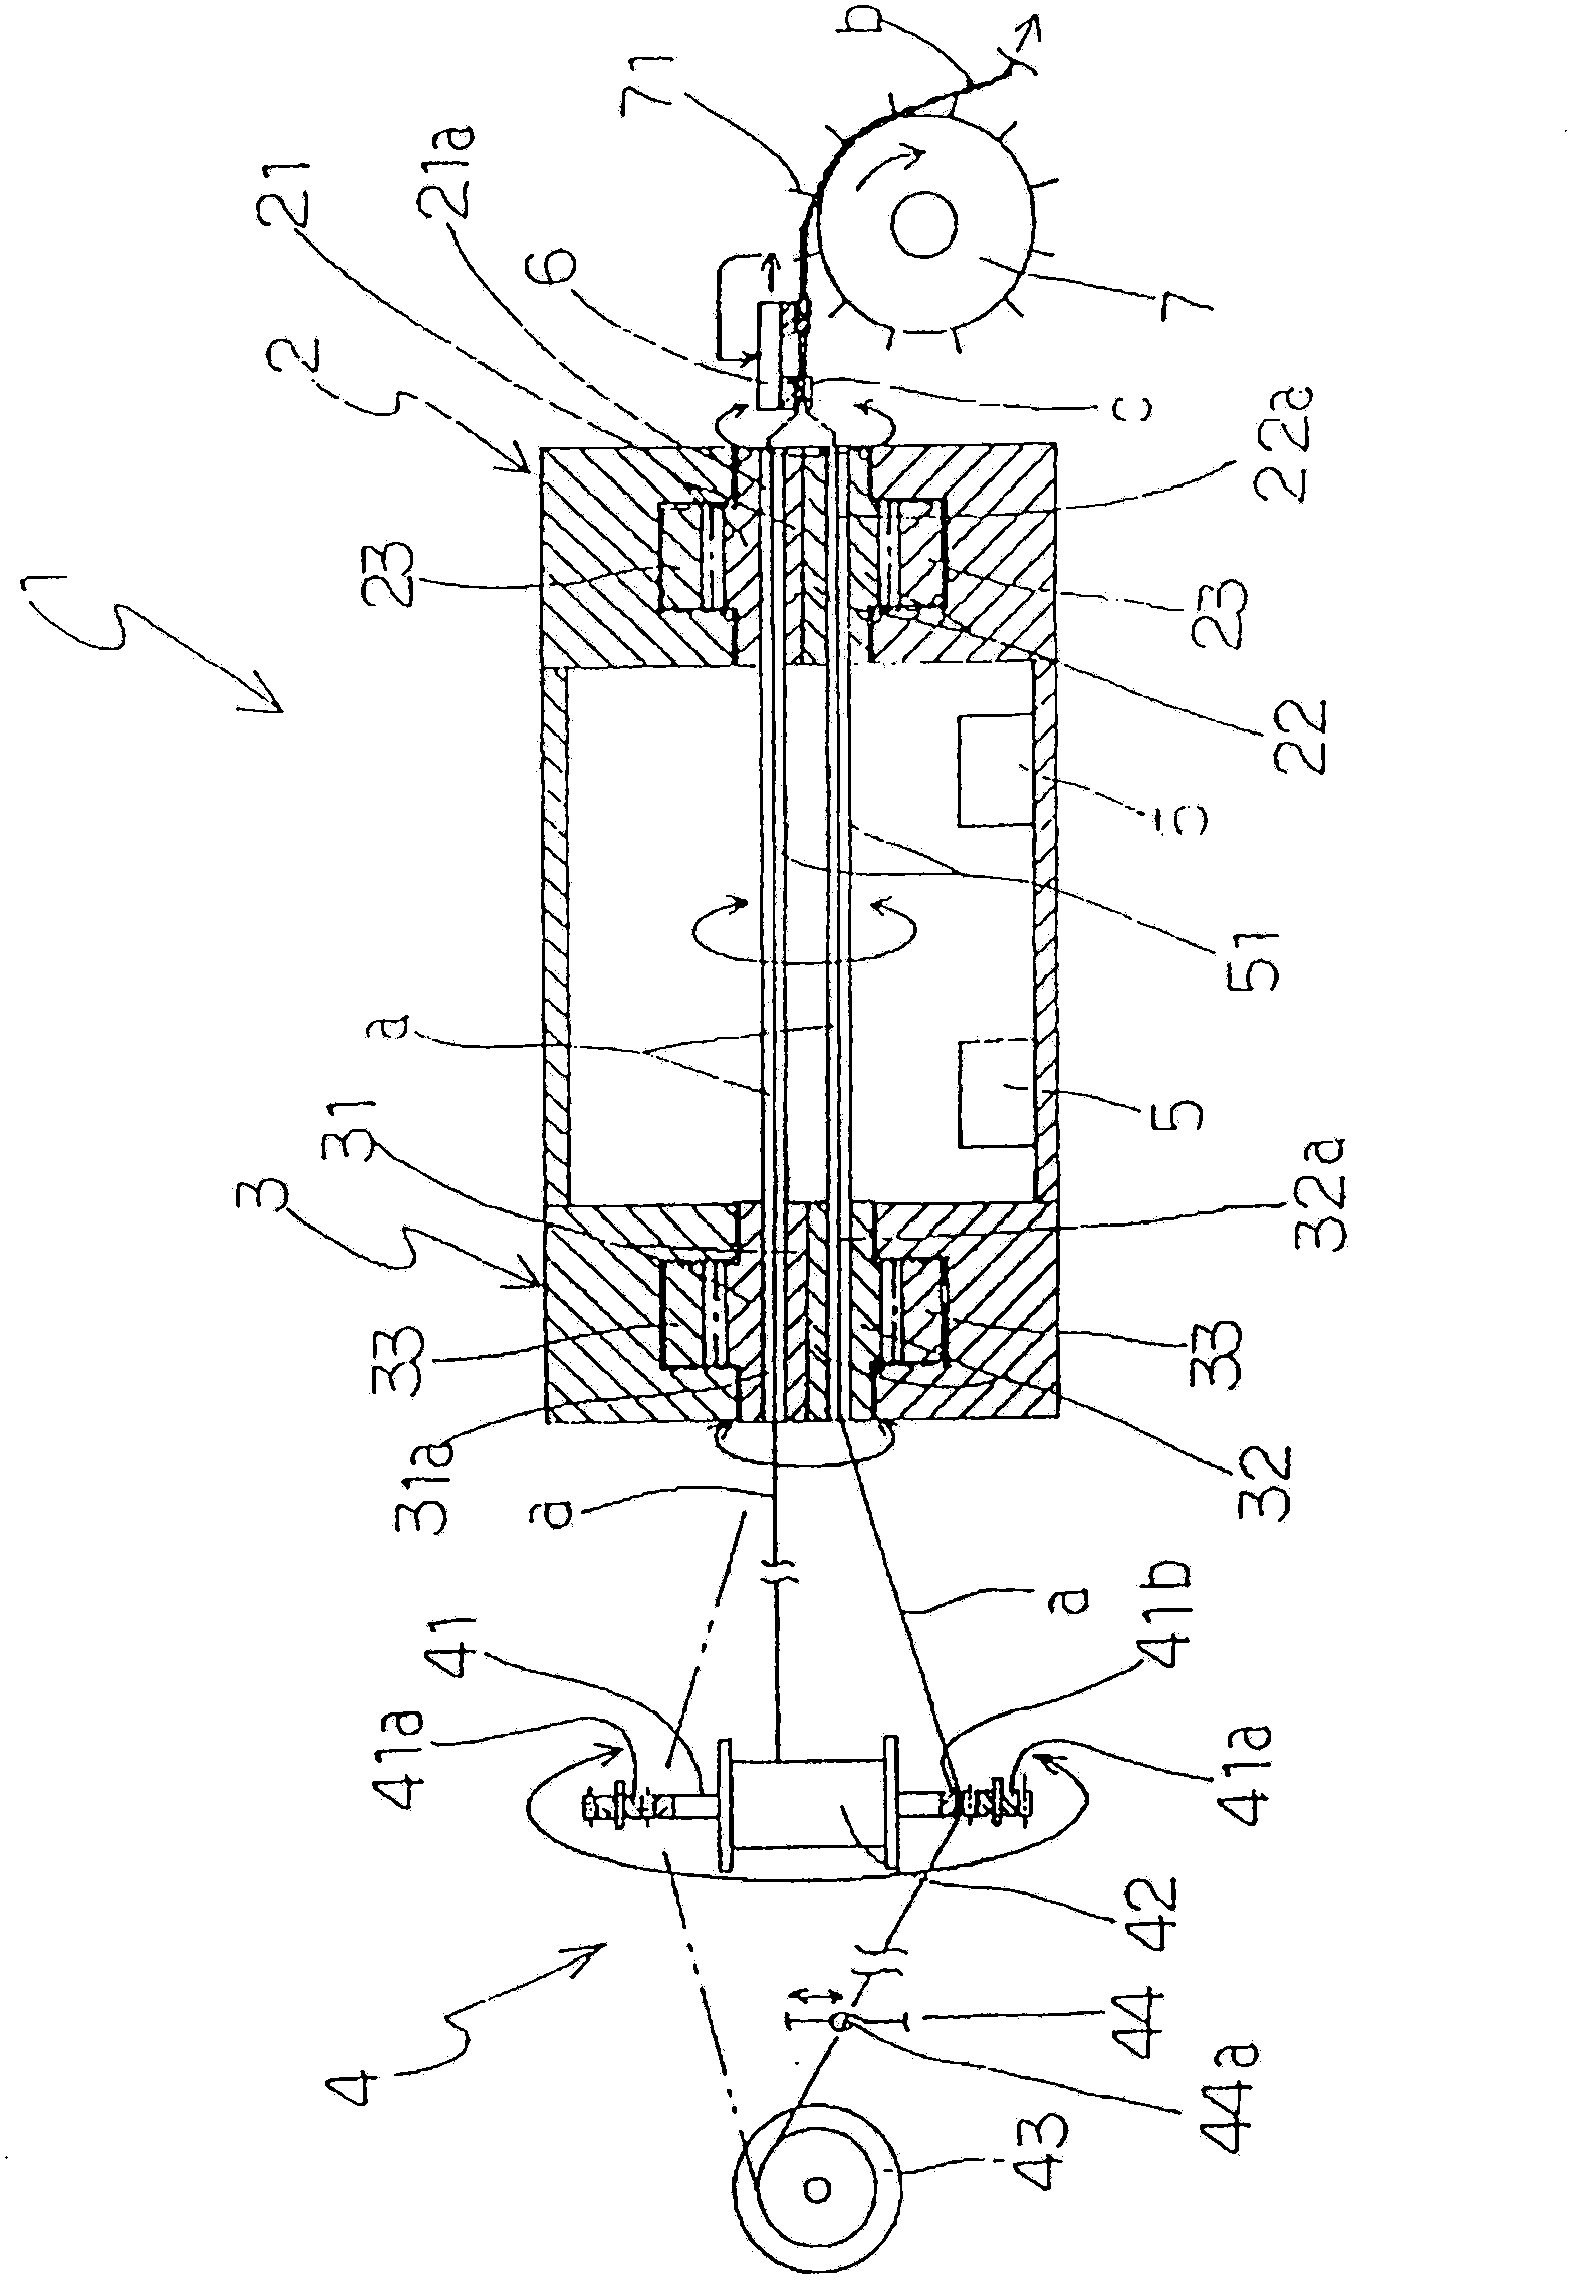 Plastic open mesh net manufacturing device and machine